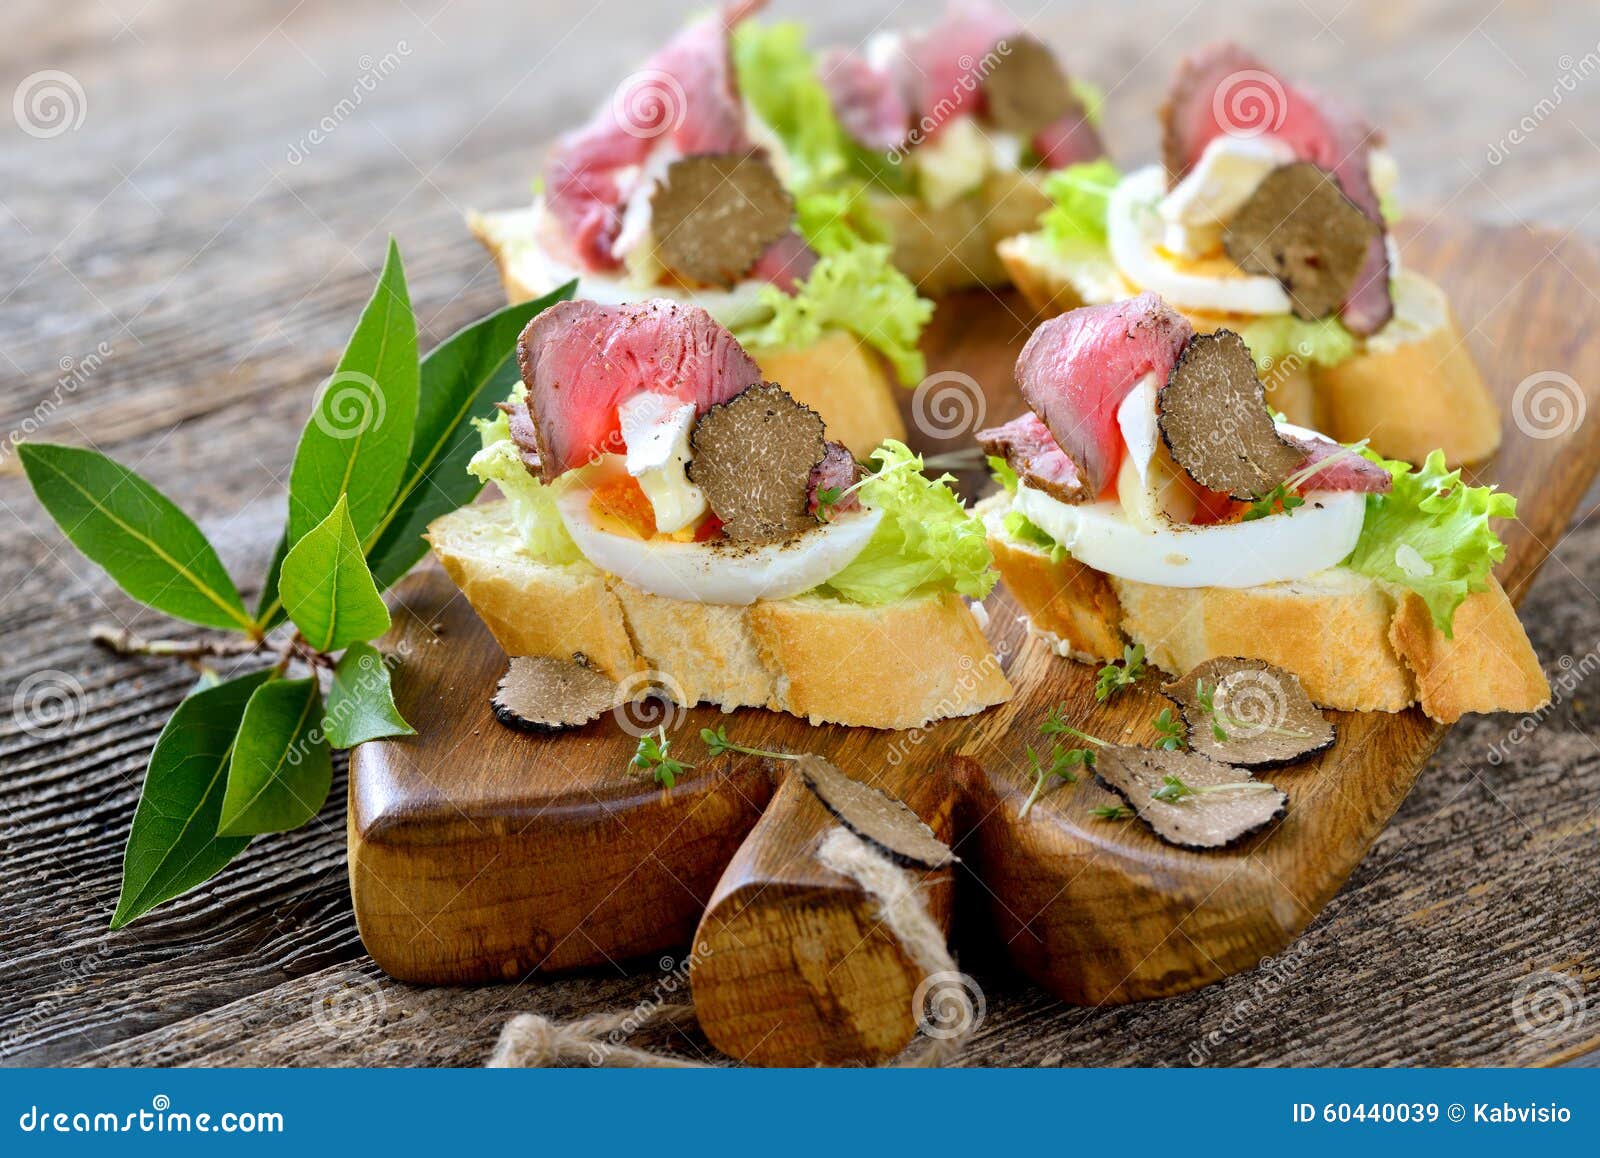 Canapes with Roast Beef and Truffles Stock Image - Image of catering ...